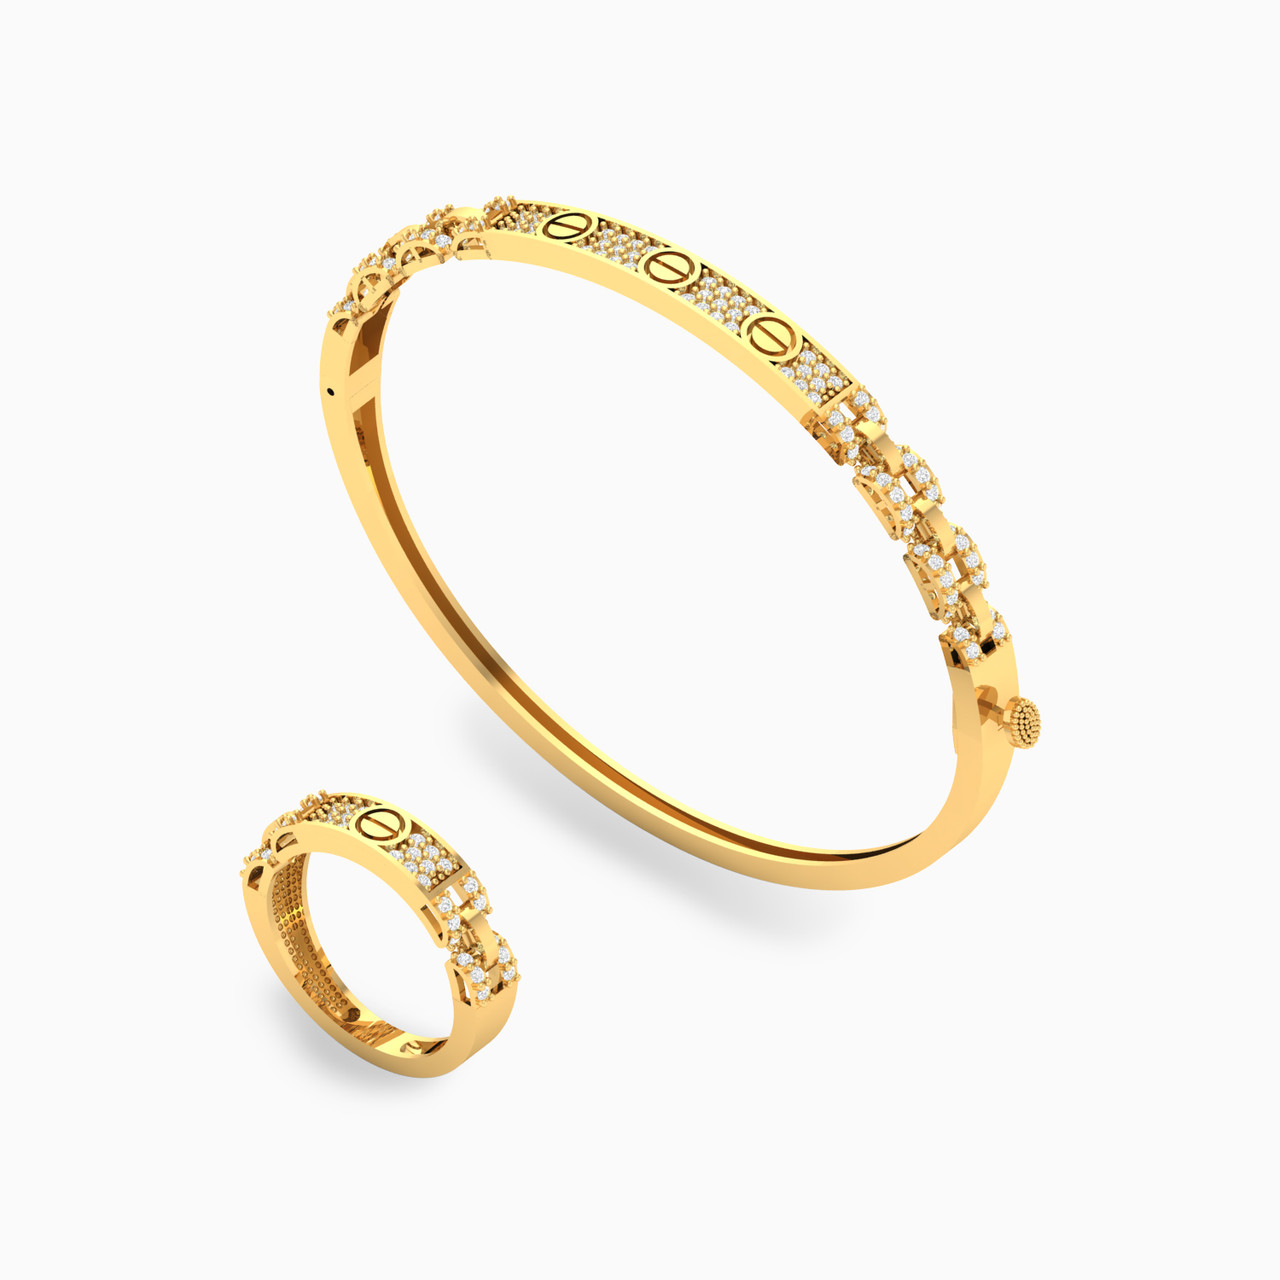 18K Gold Cubic Zirconia Bangle & Ring Jewelry Set -2 Pieces